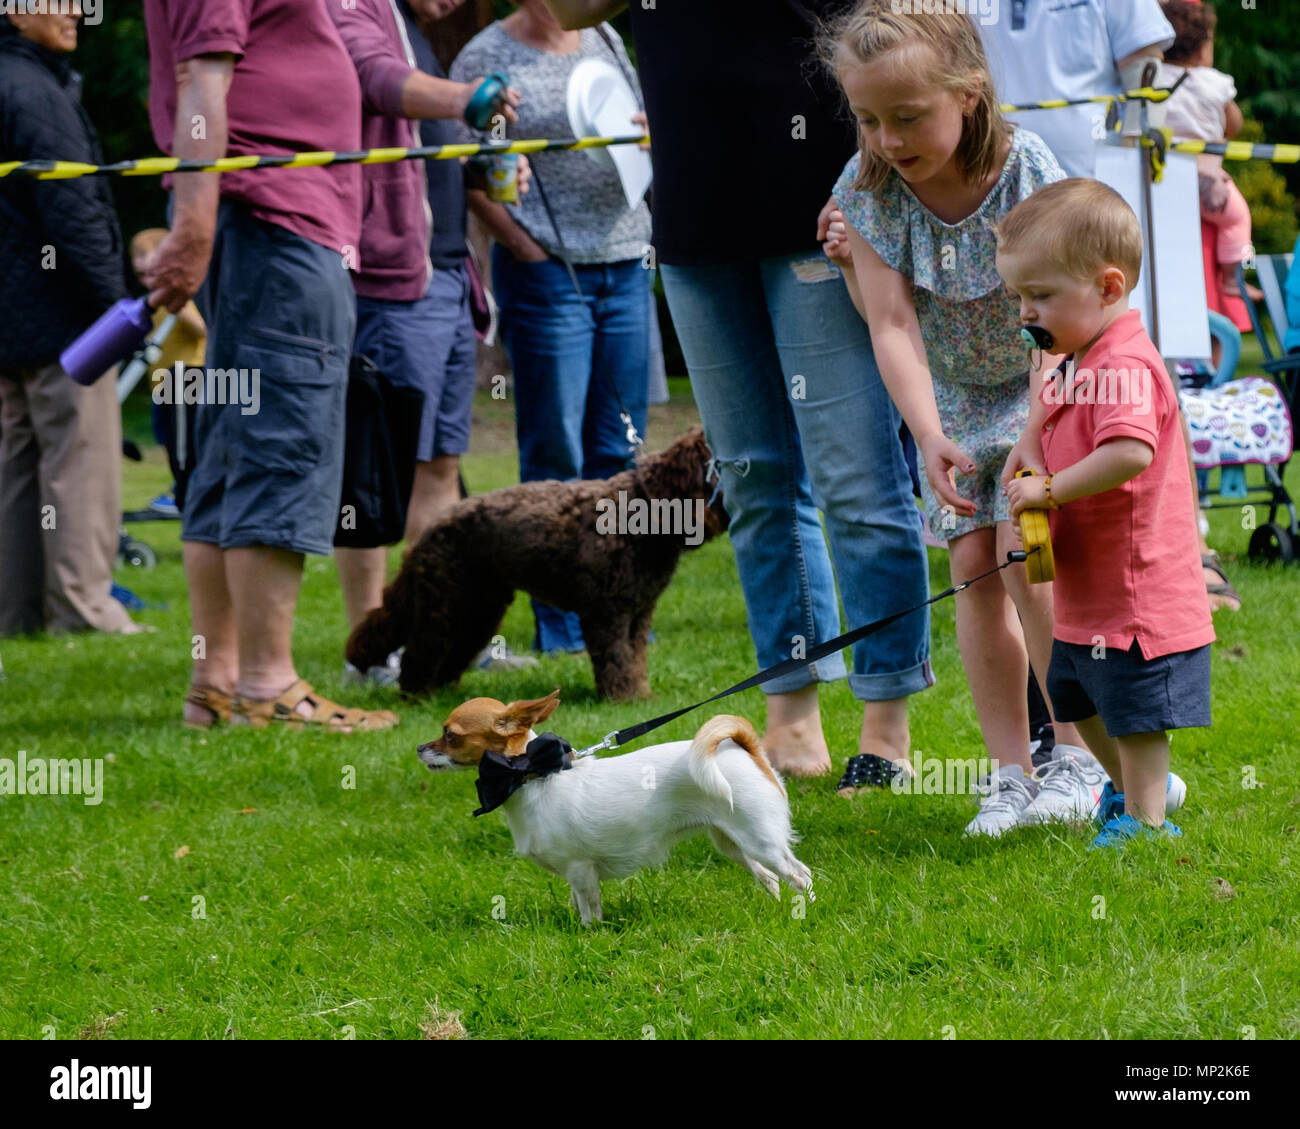 Big sister helps toddler brother walk small white dog with bow on collar at Dog Show in Canons Park, Edgware, North London at annual Family Fun Day. Stock Photo